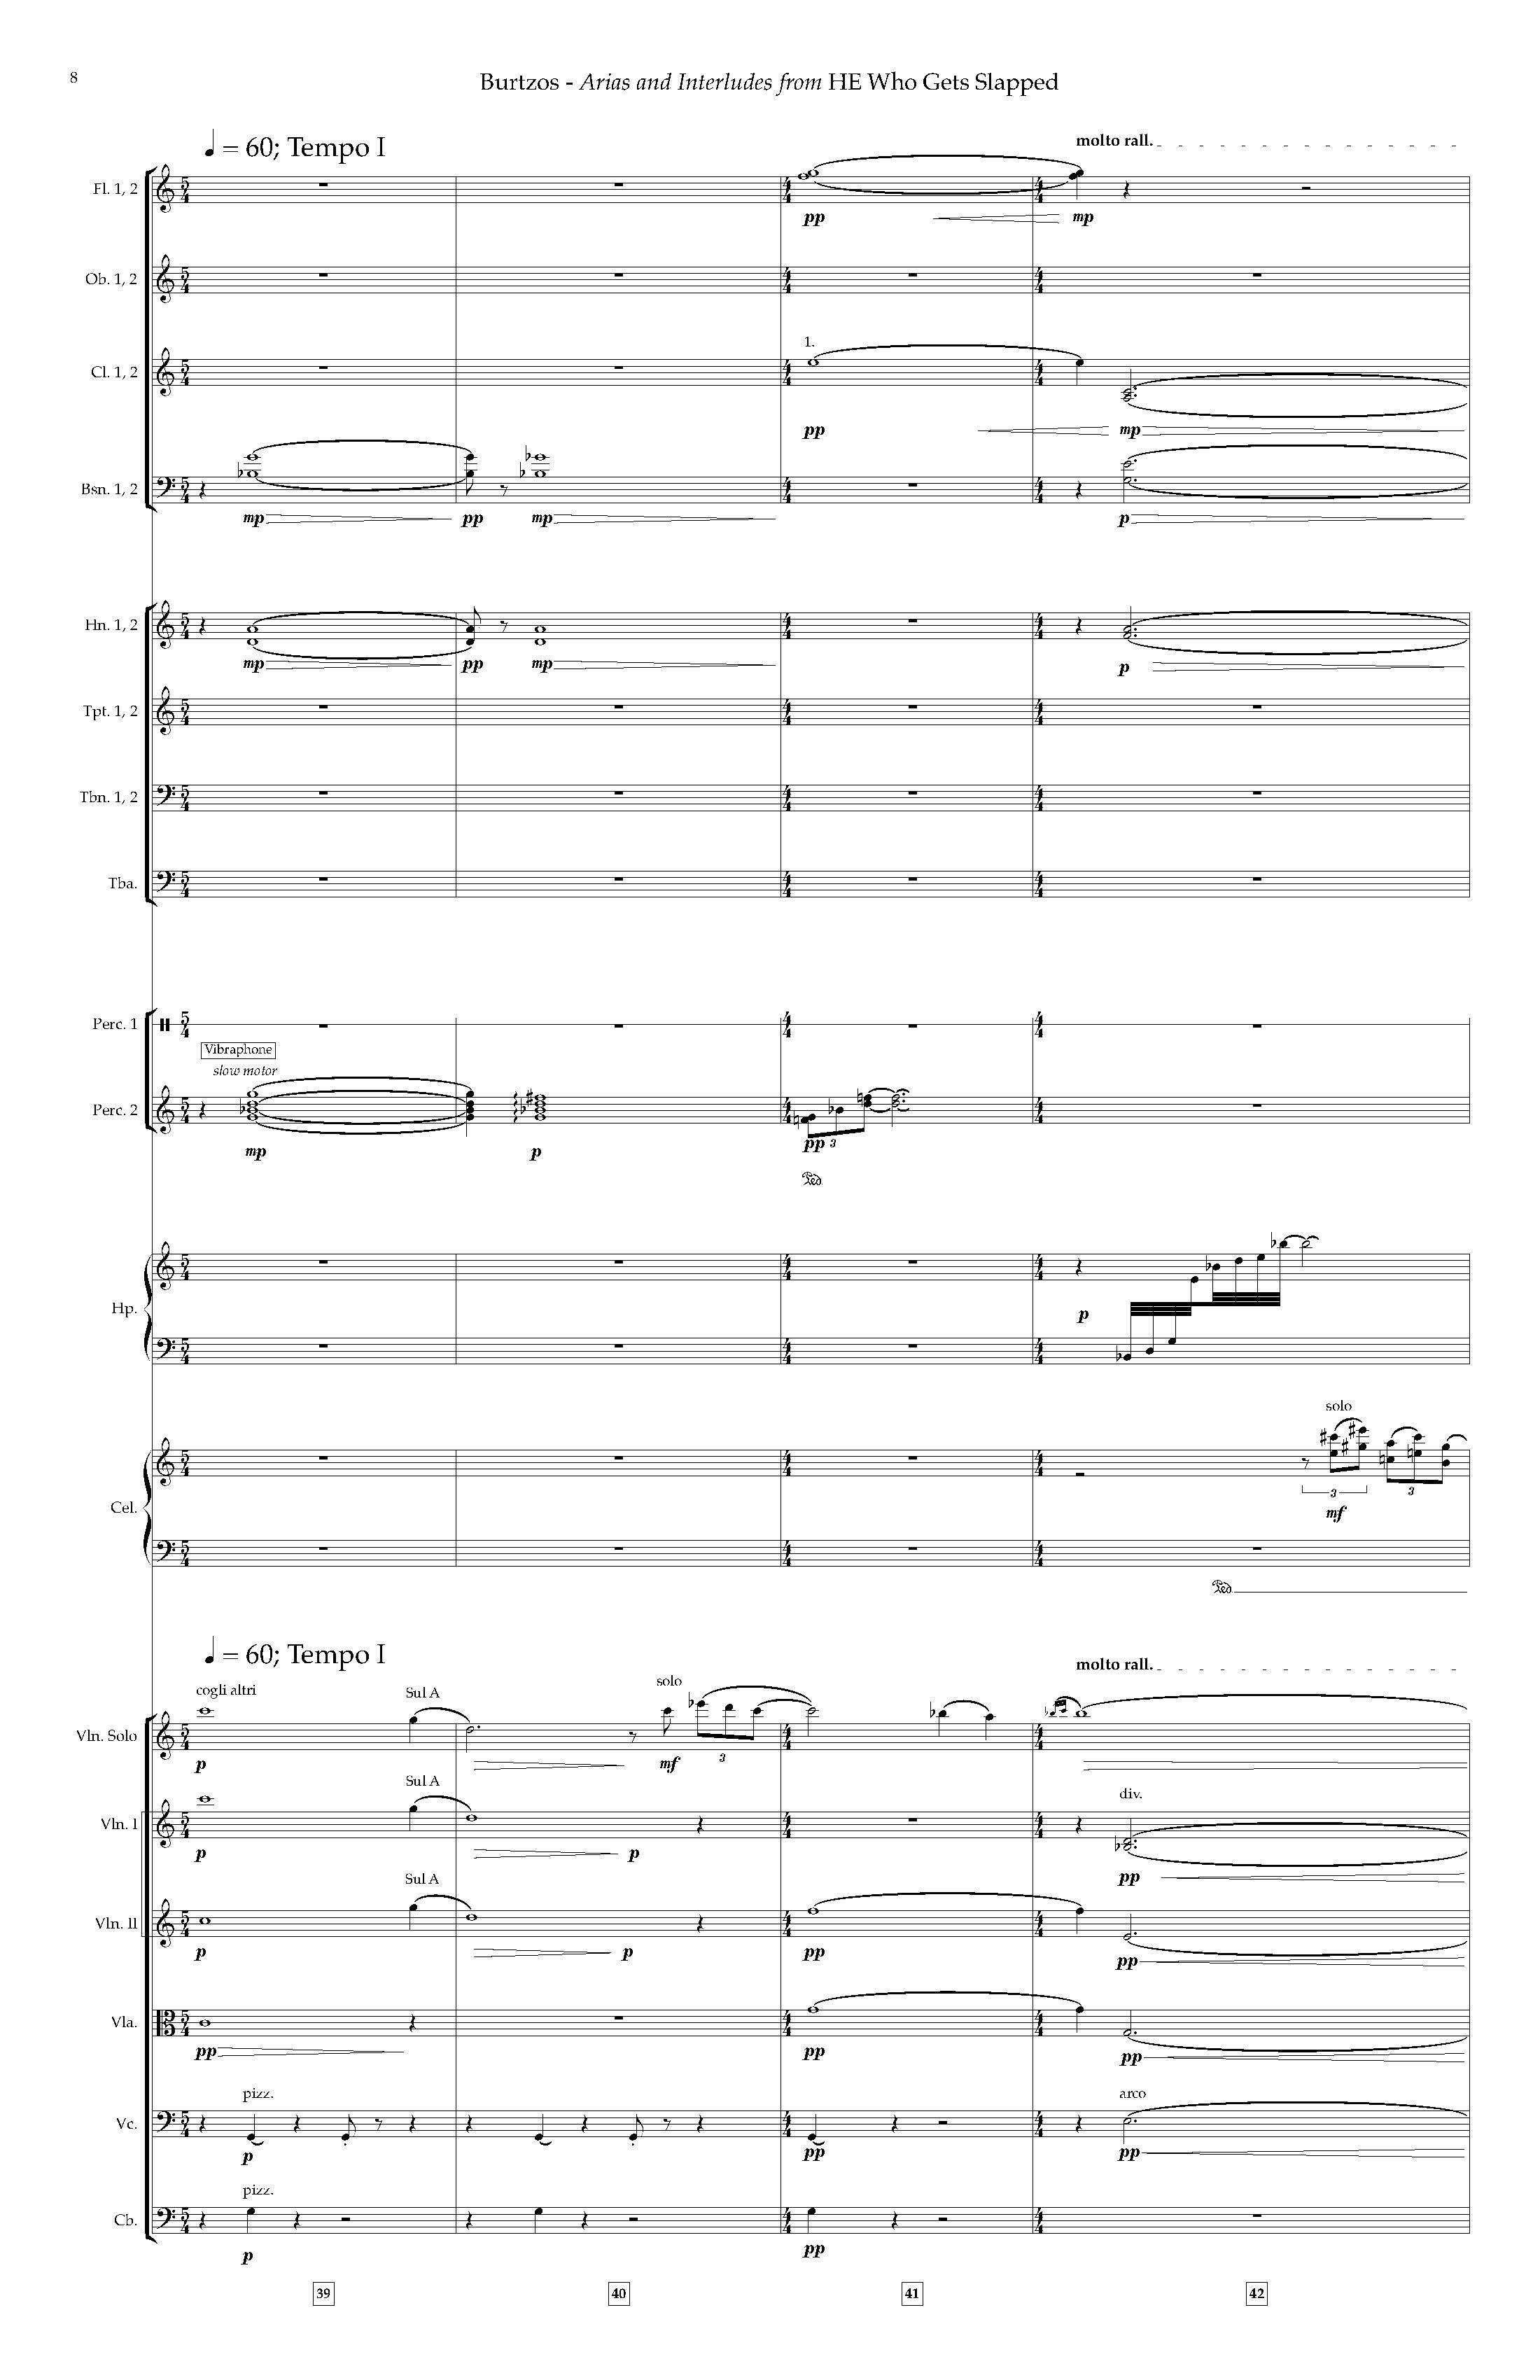 Arias and Interludes from HWGS - Complete Score_Page_14.jpg